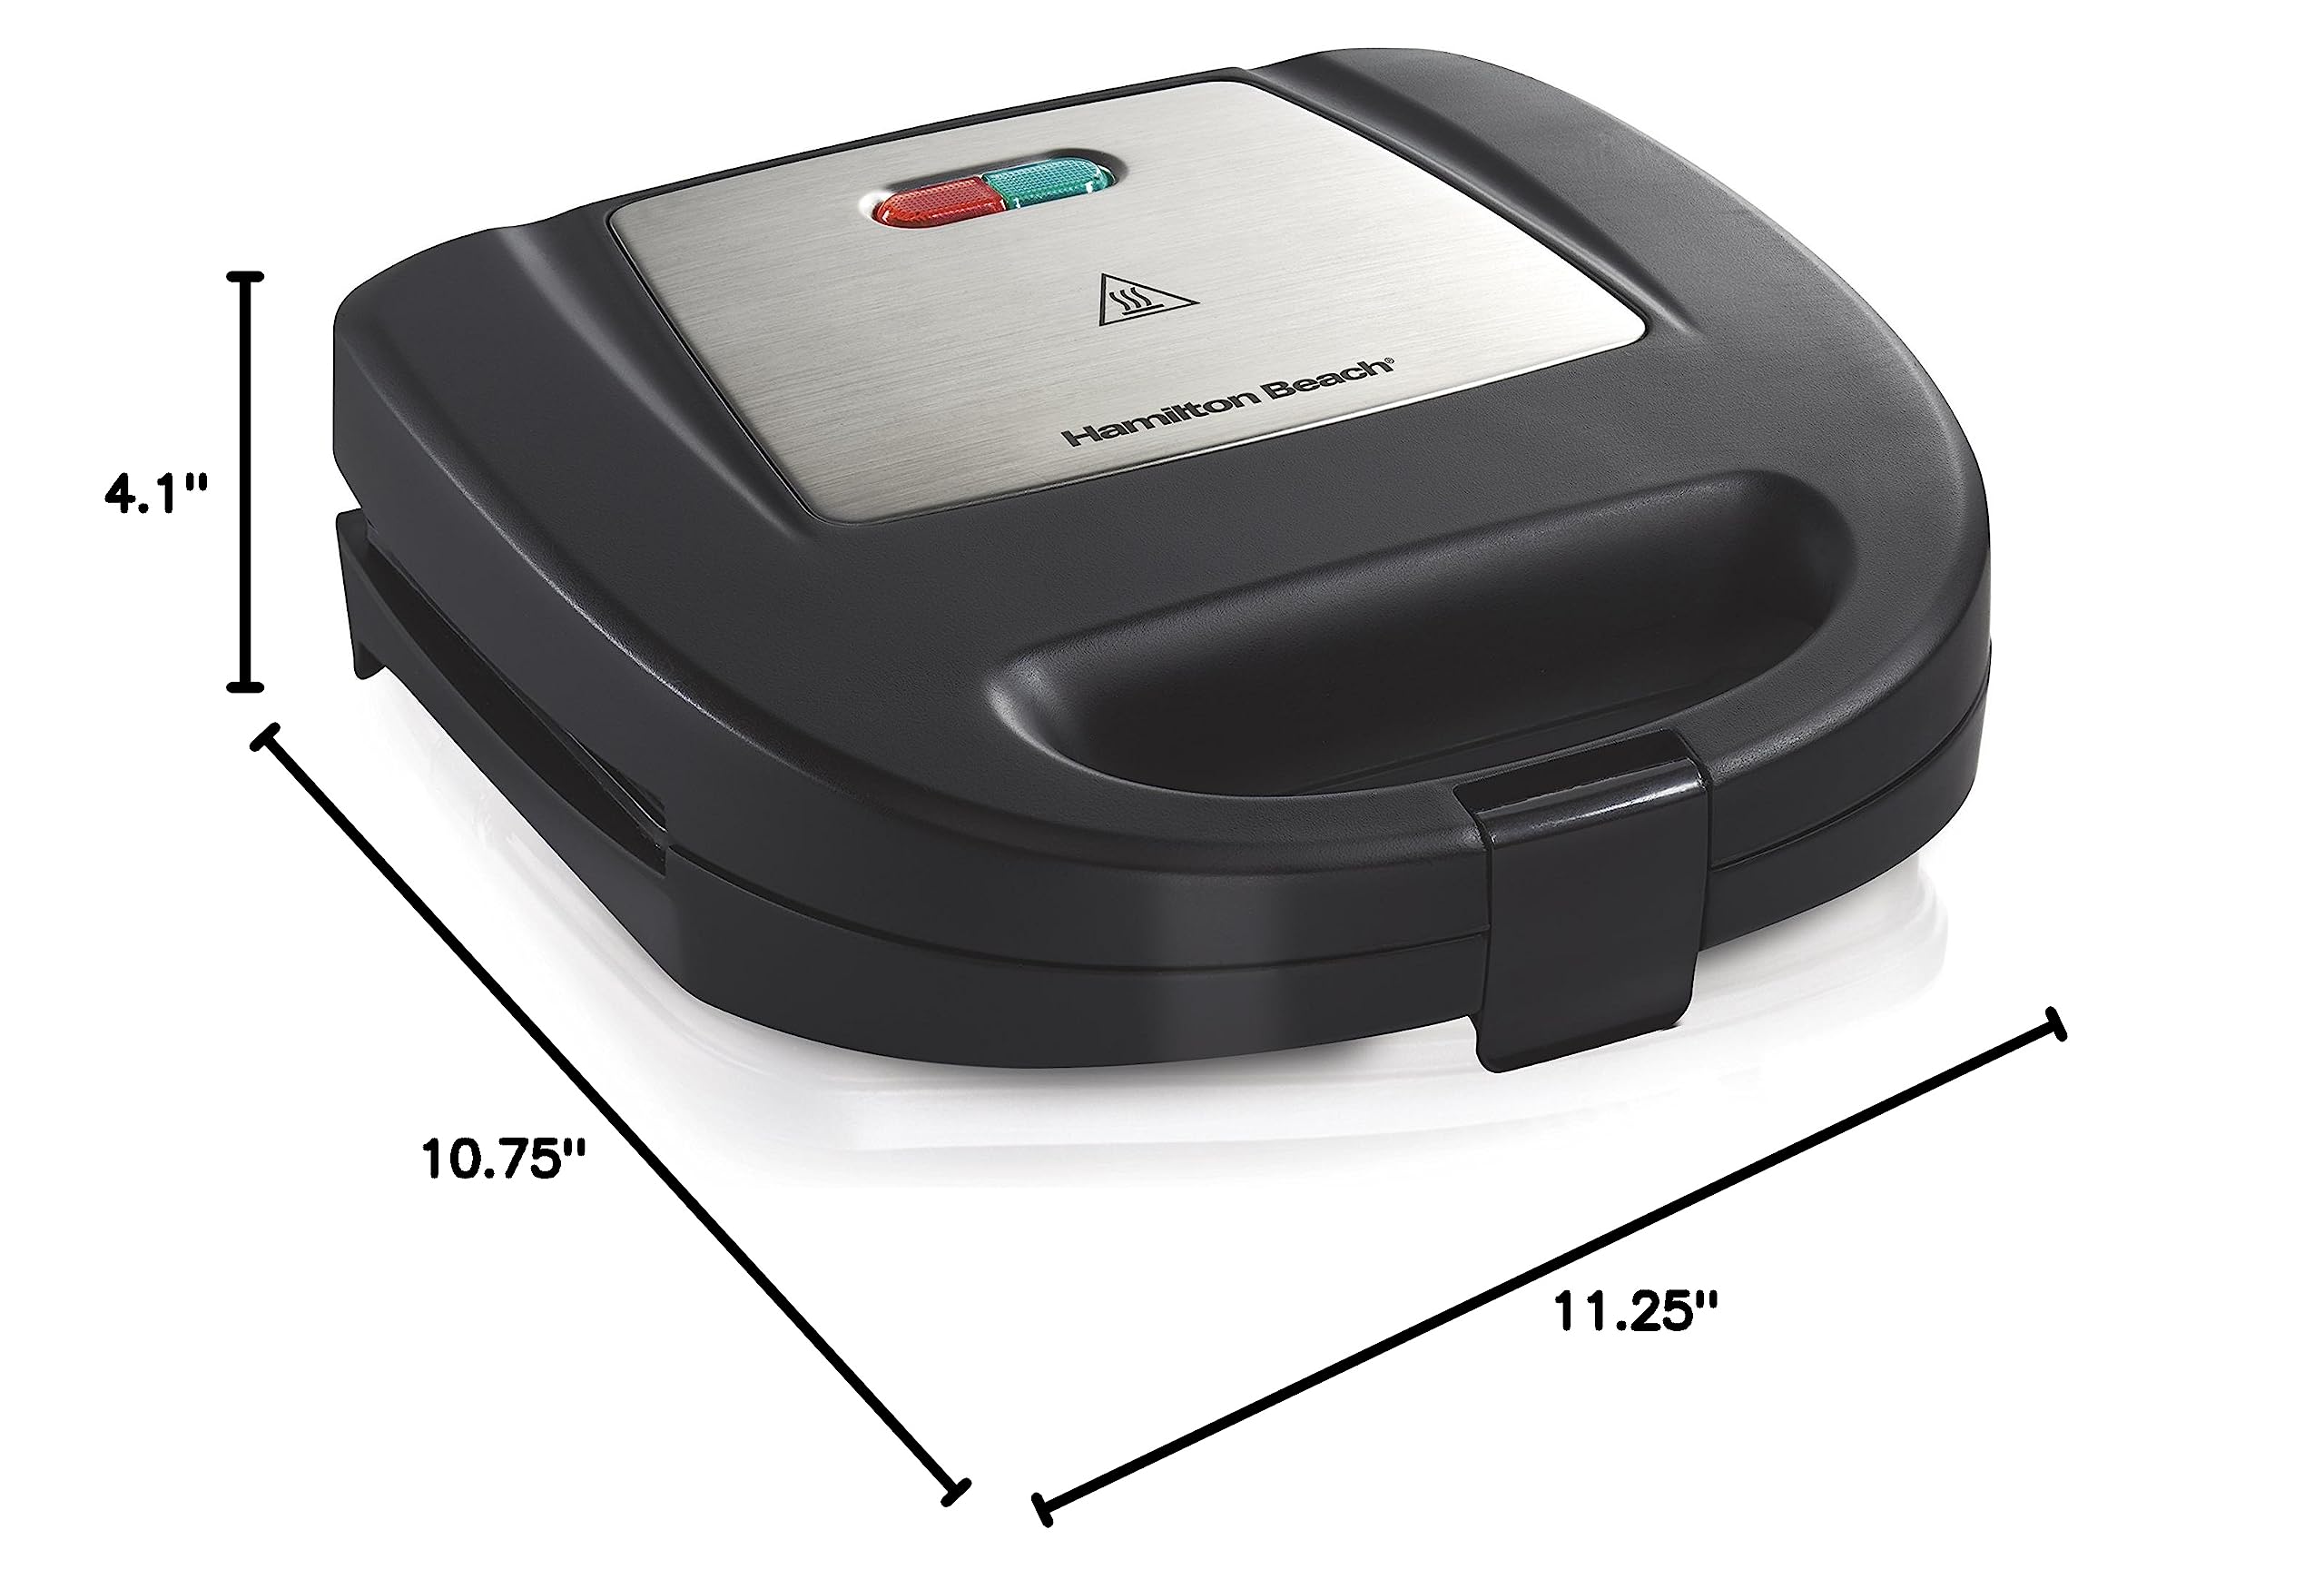 Hamilton Beach Electric Sealed Sandwich Maker Grill with Nonstick Plates, Makes Stuffed French Toast, Omelets, Compact & Easy to Store, Black (25430)